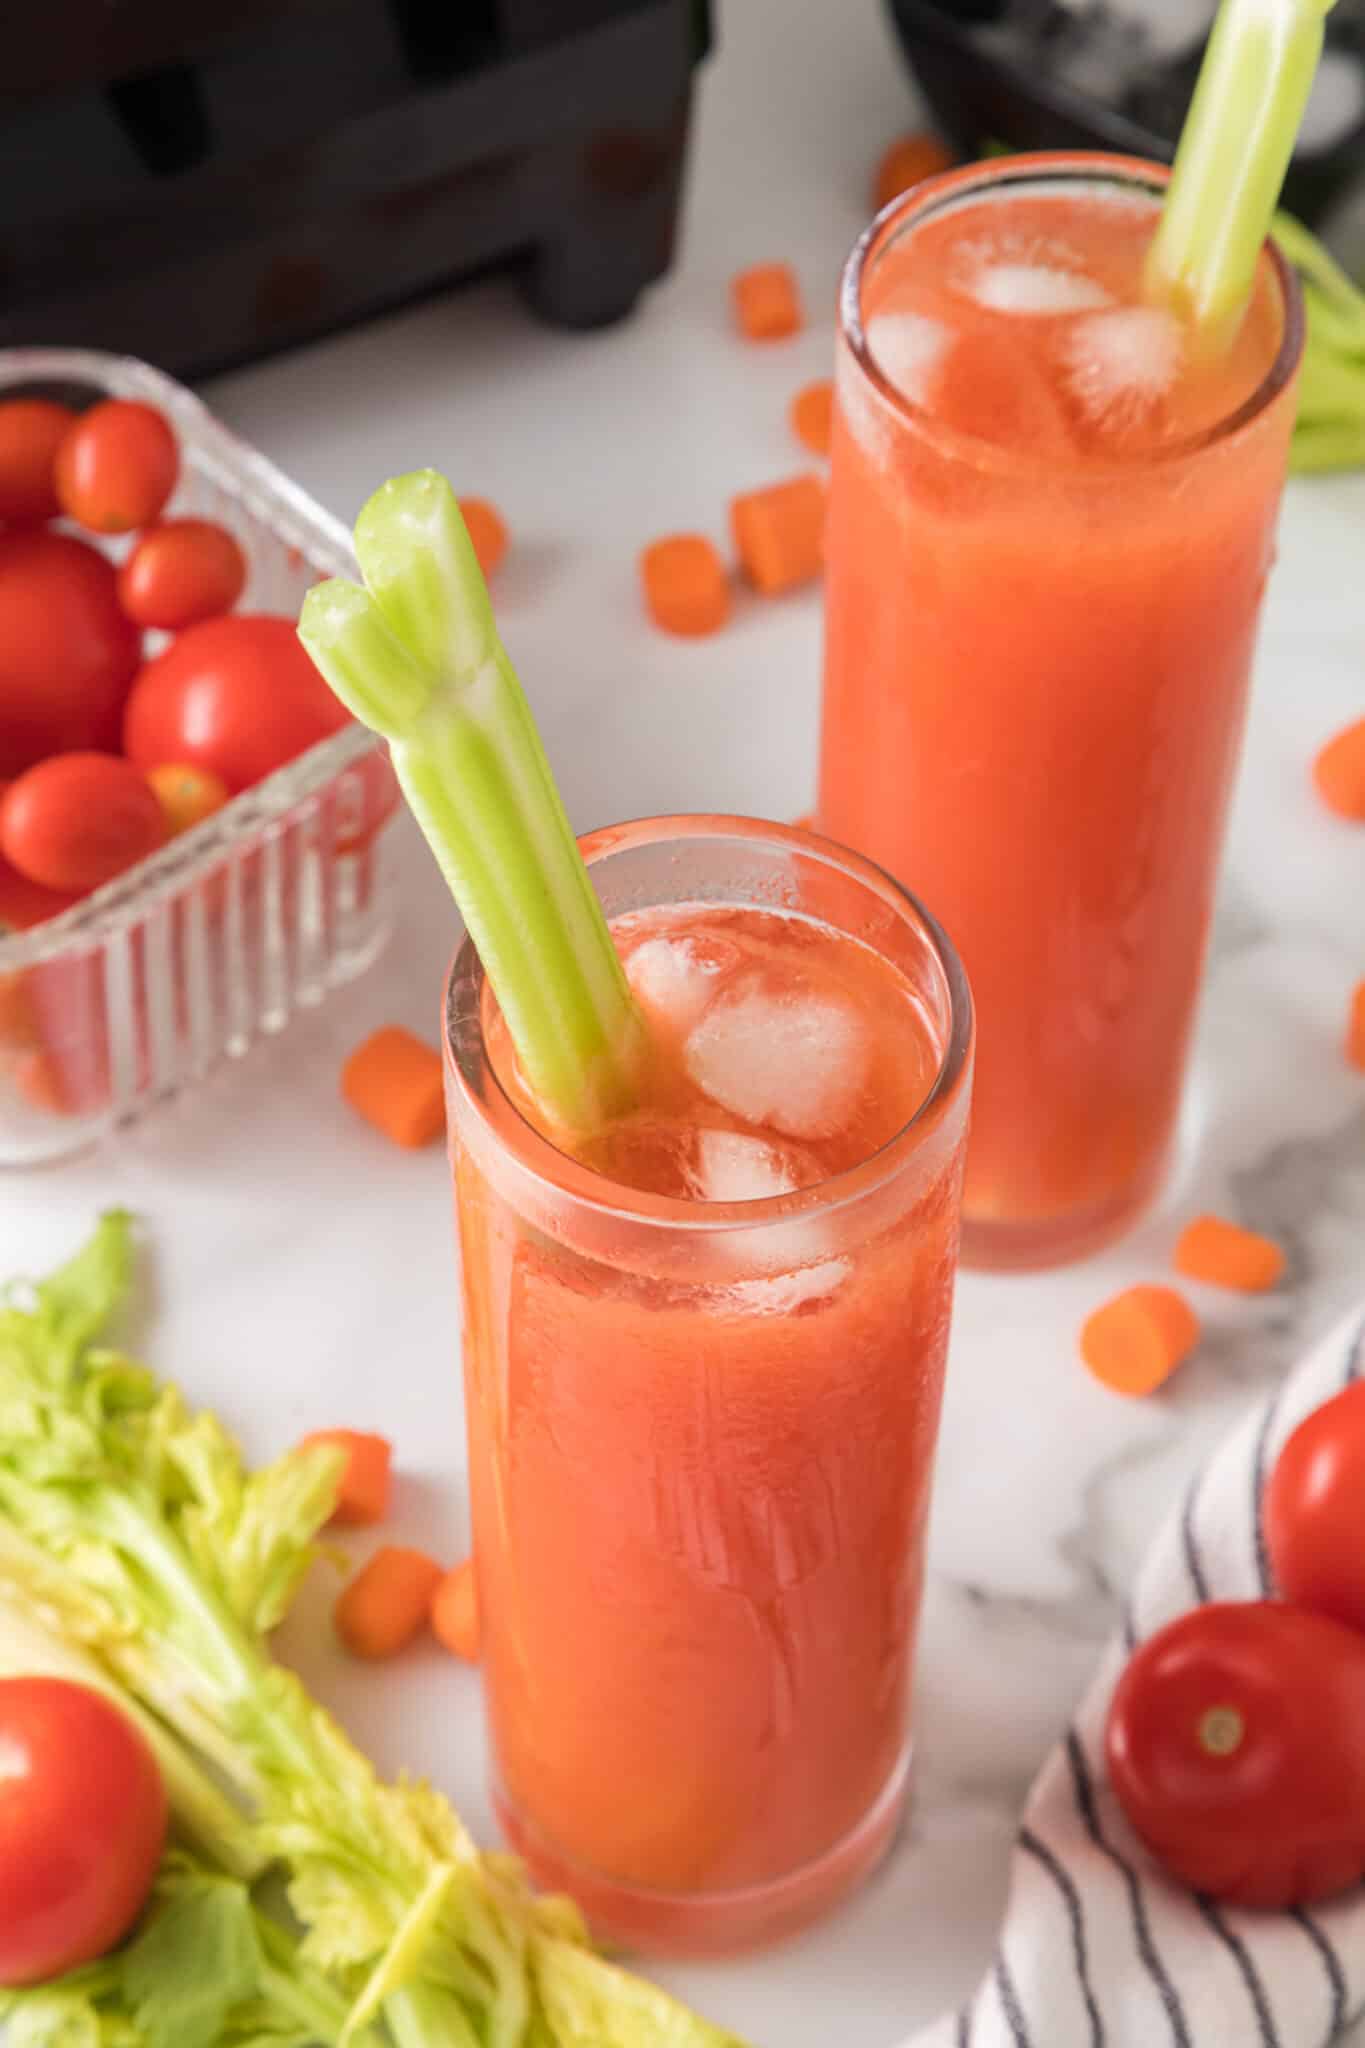 tomato juice recipe served with a stalk of celery and ice cubes.